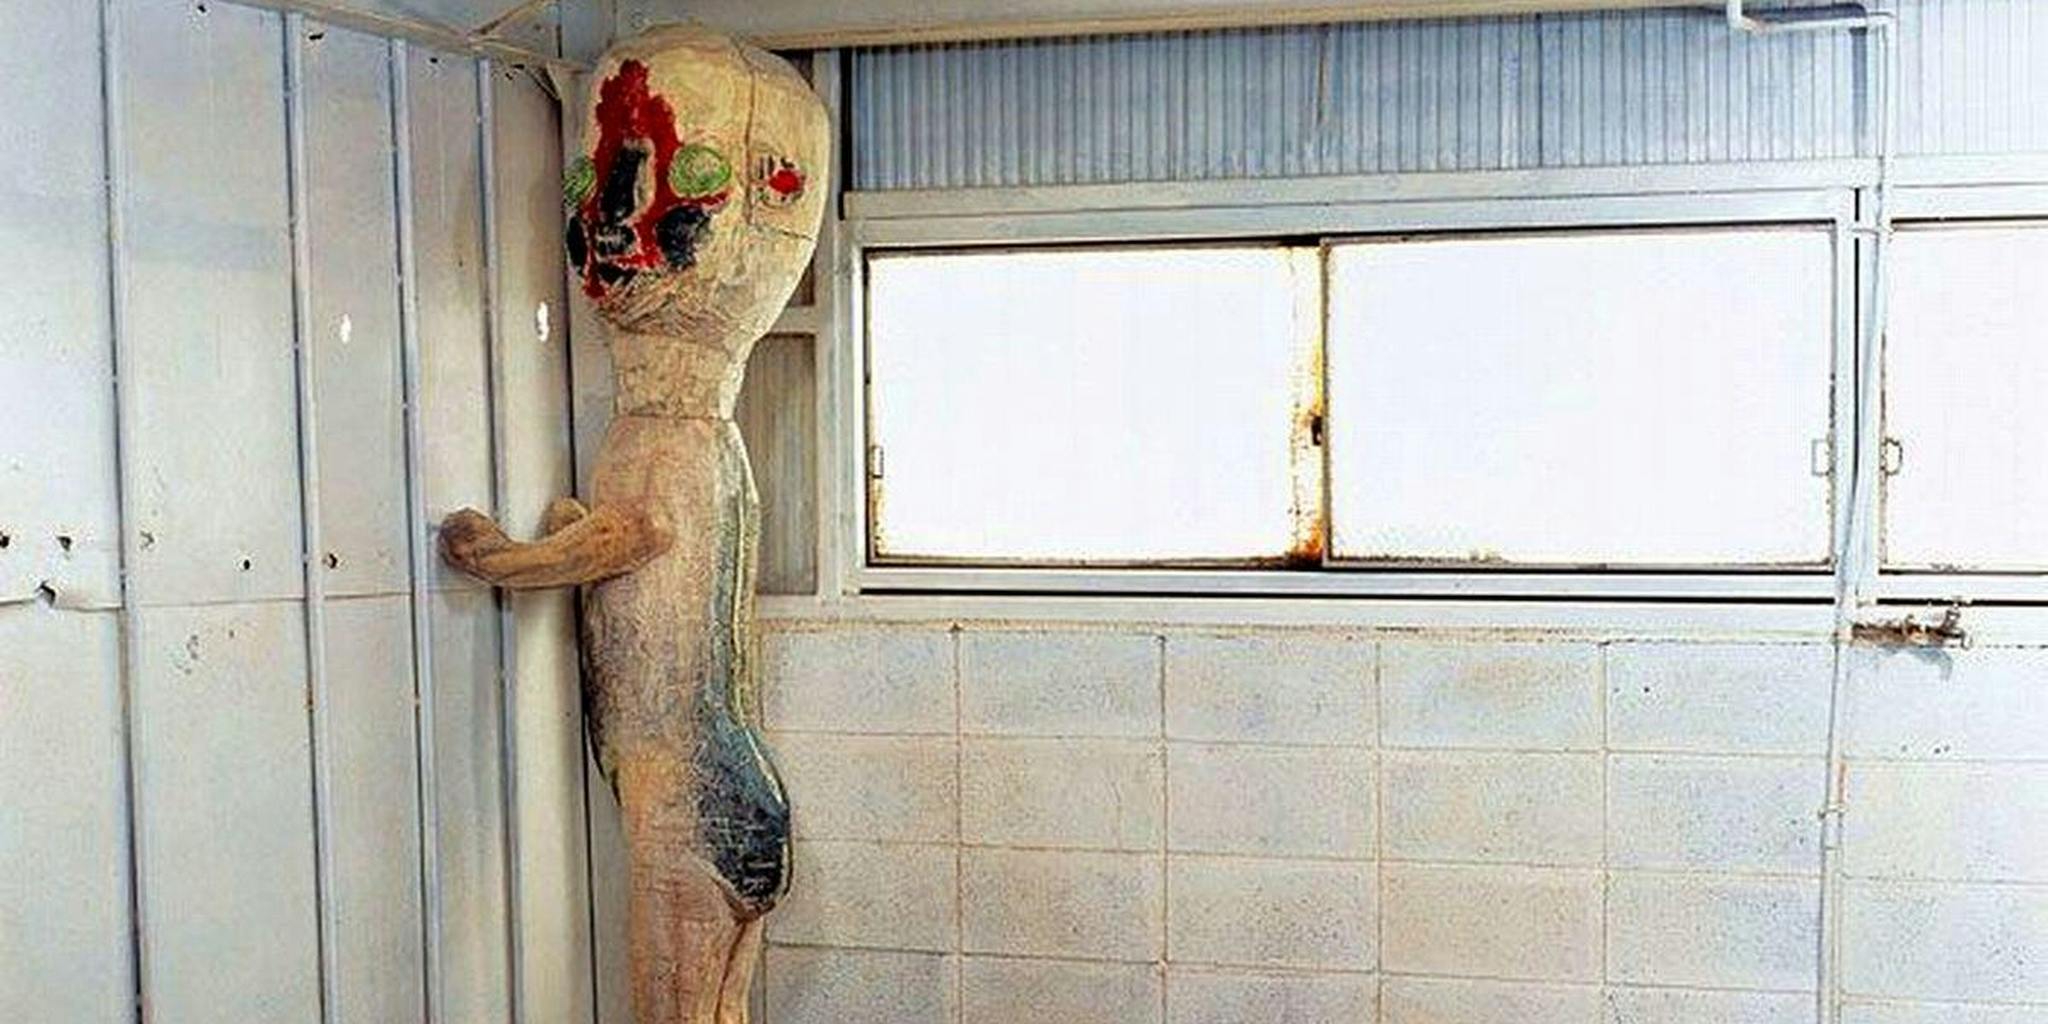 SCP - Containment Breach on X: For day 7 of the final renders, we